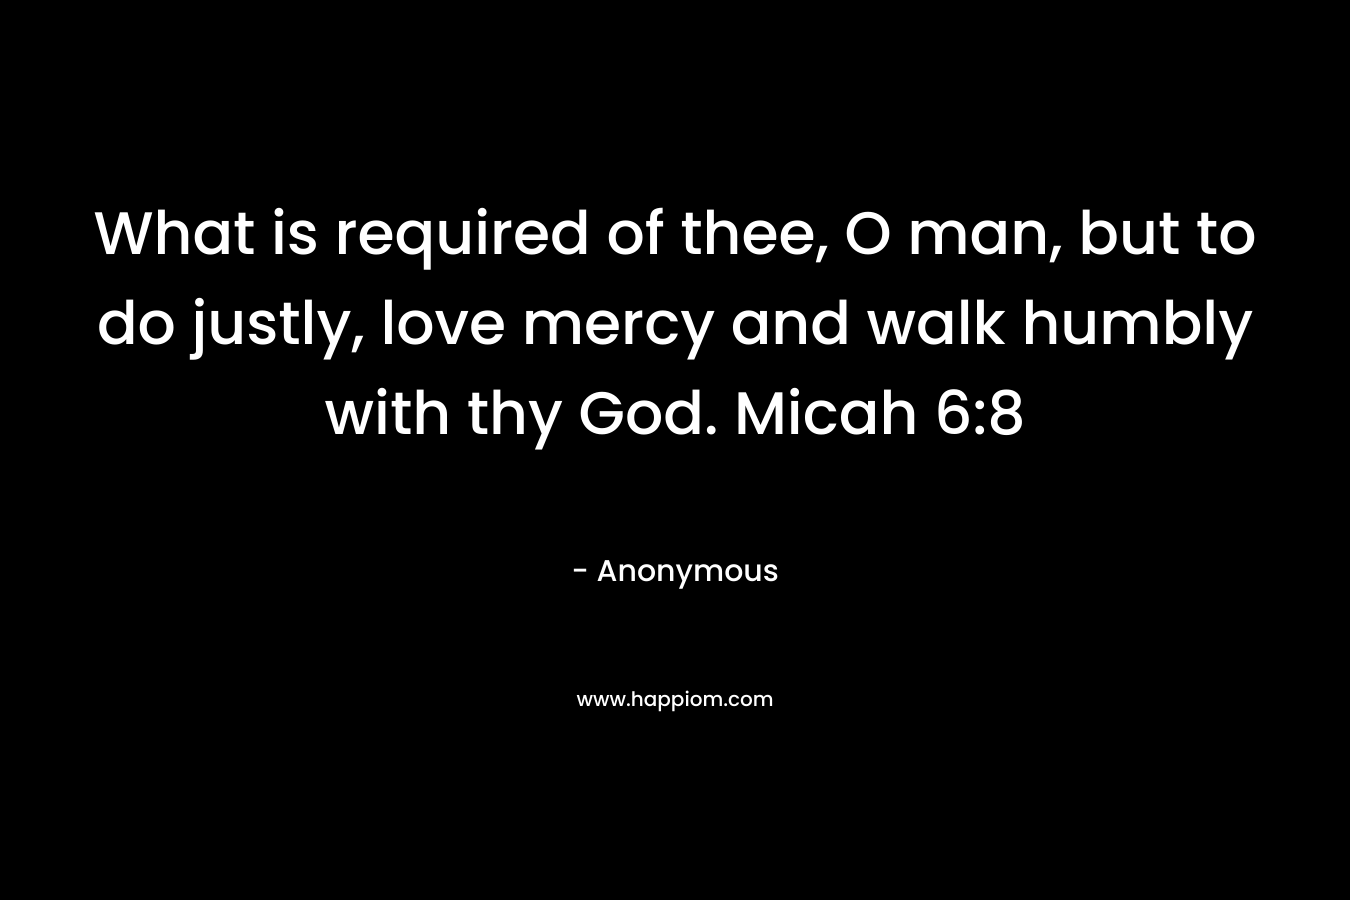 What is required of thee, O man, but to do justly, love mercy and walk humbly with thy God. Micah 6:8 – Anonymous